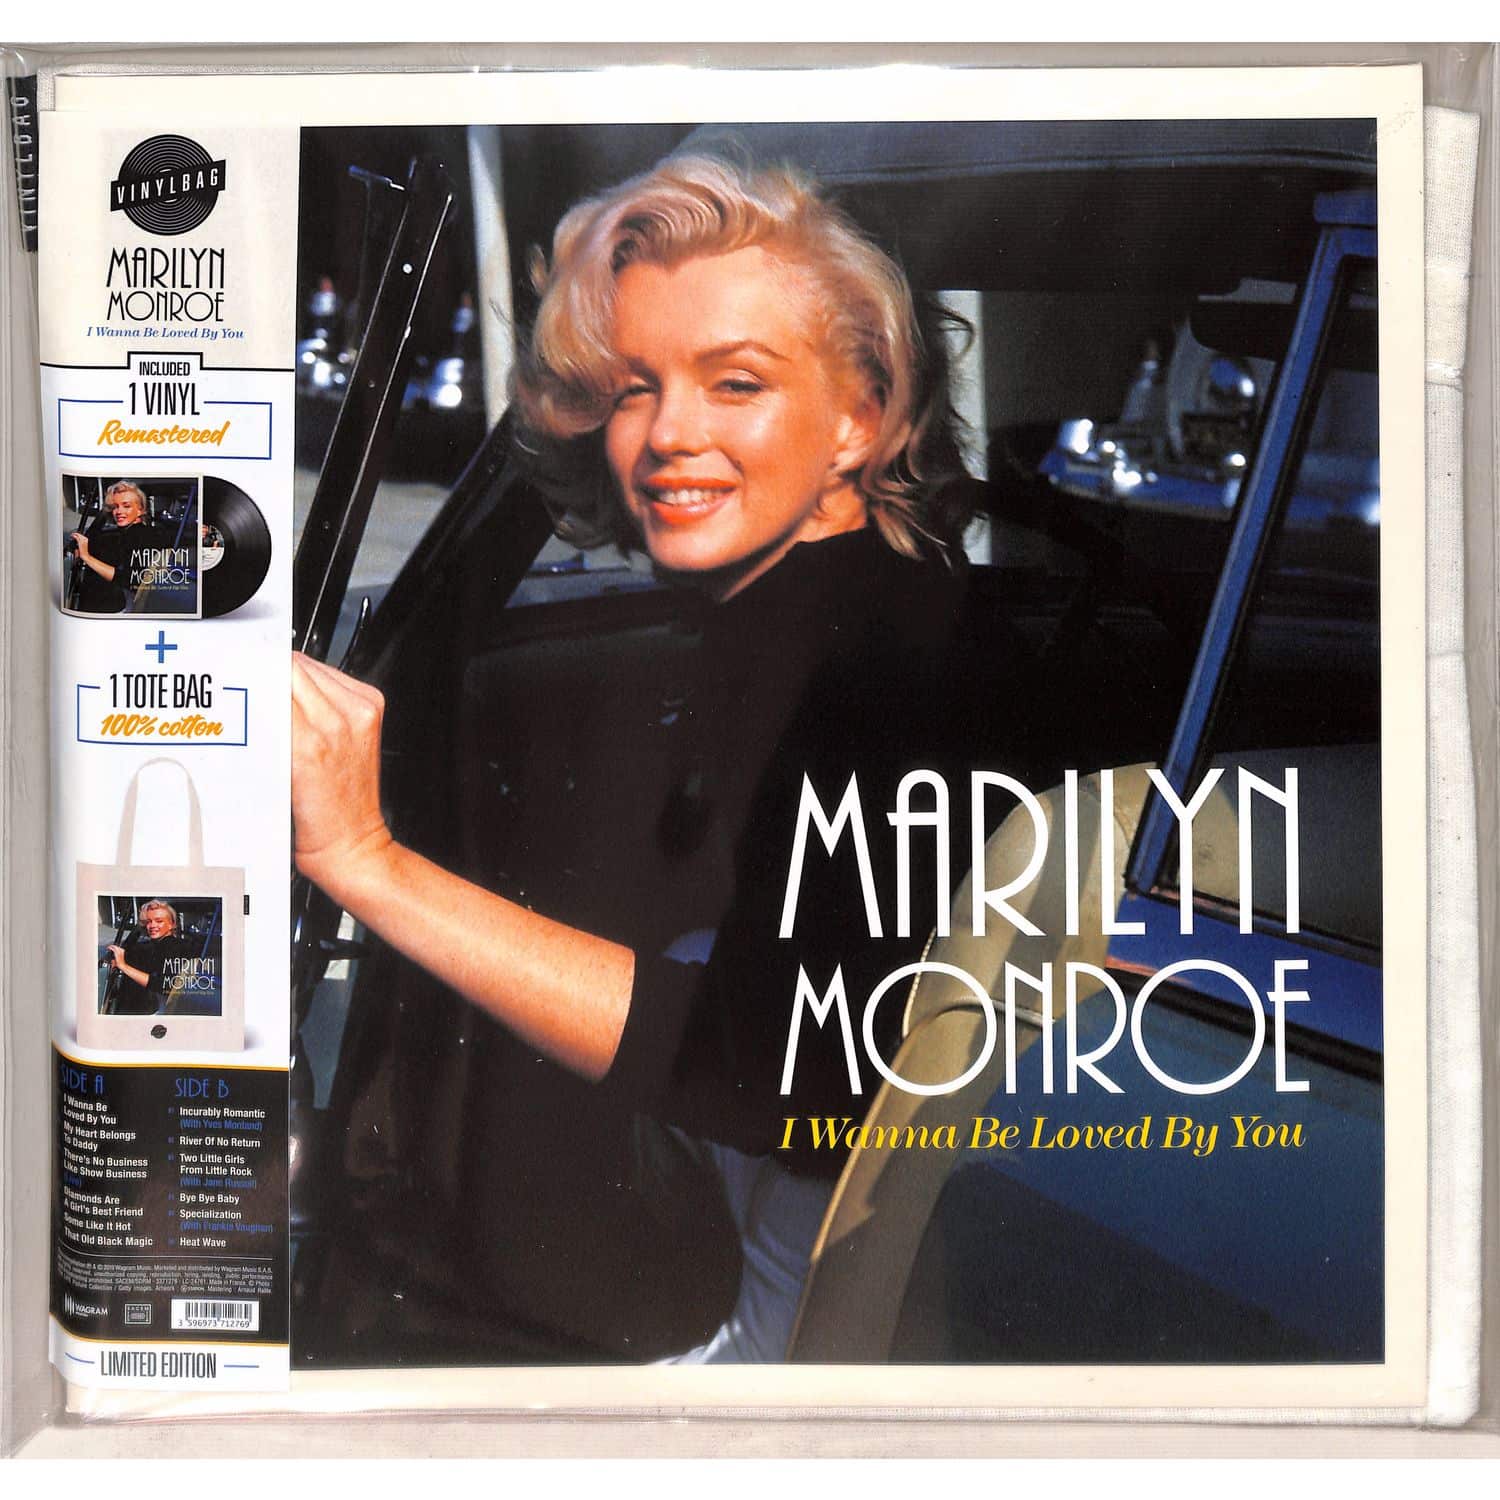 Marilyn Monroe - I WANNA BE LOVED BY YOU 